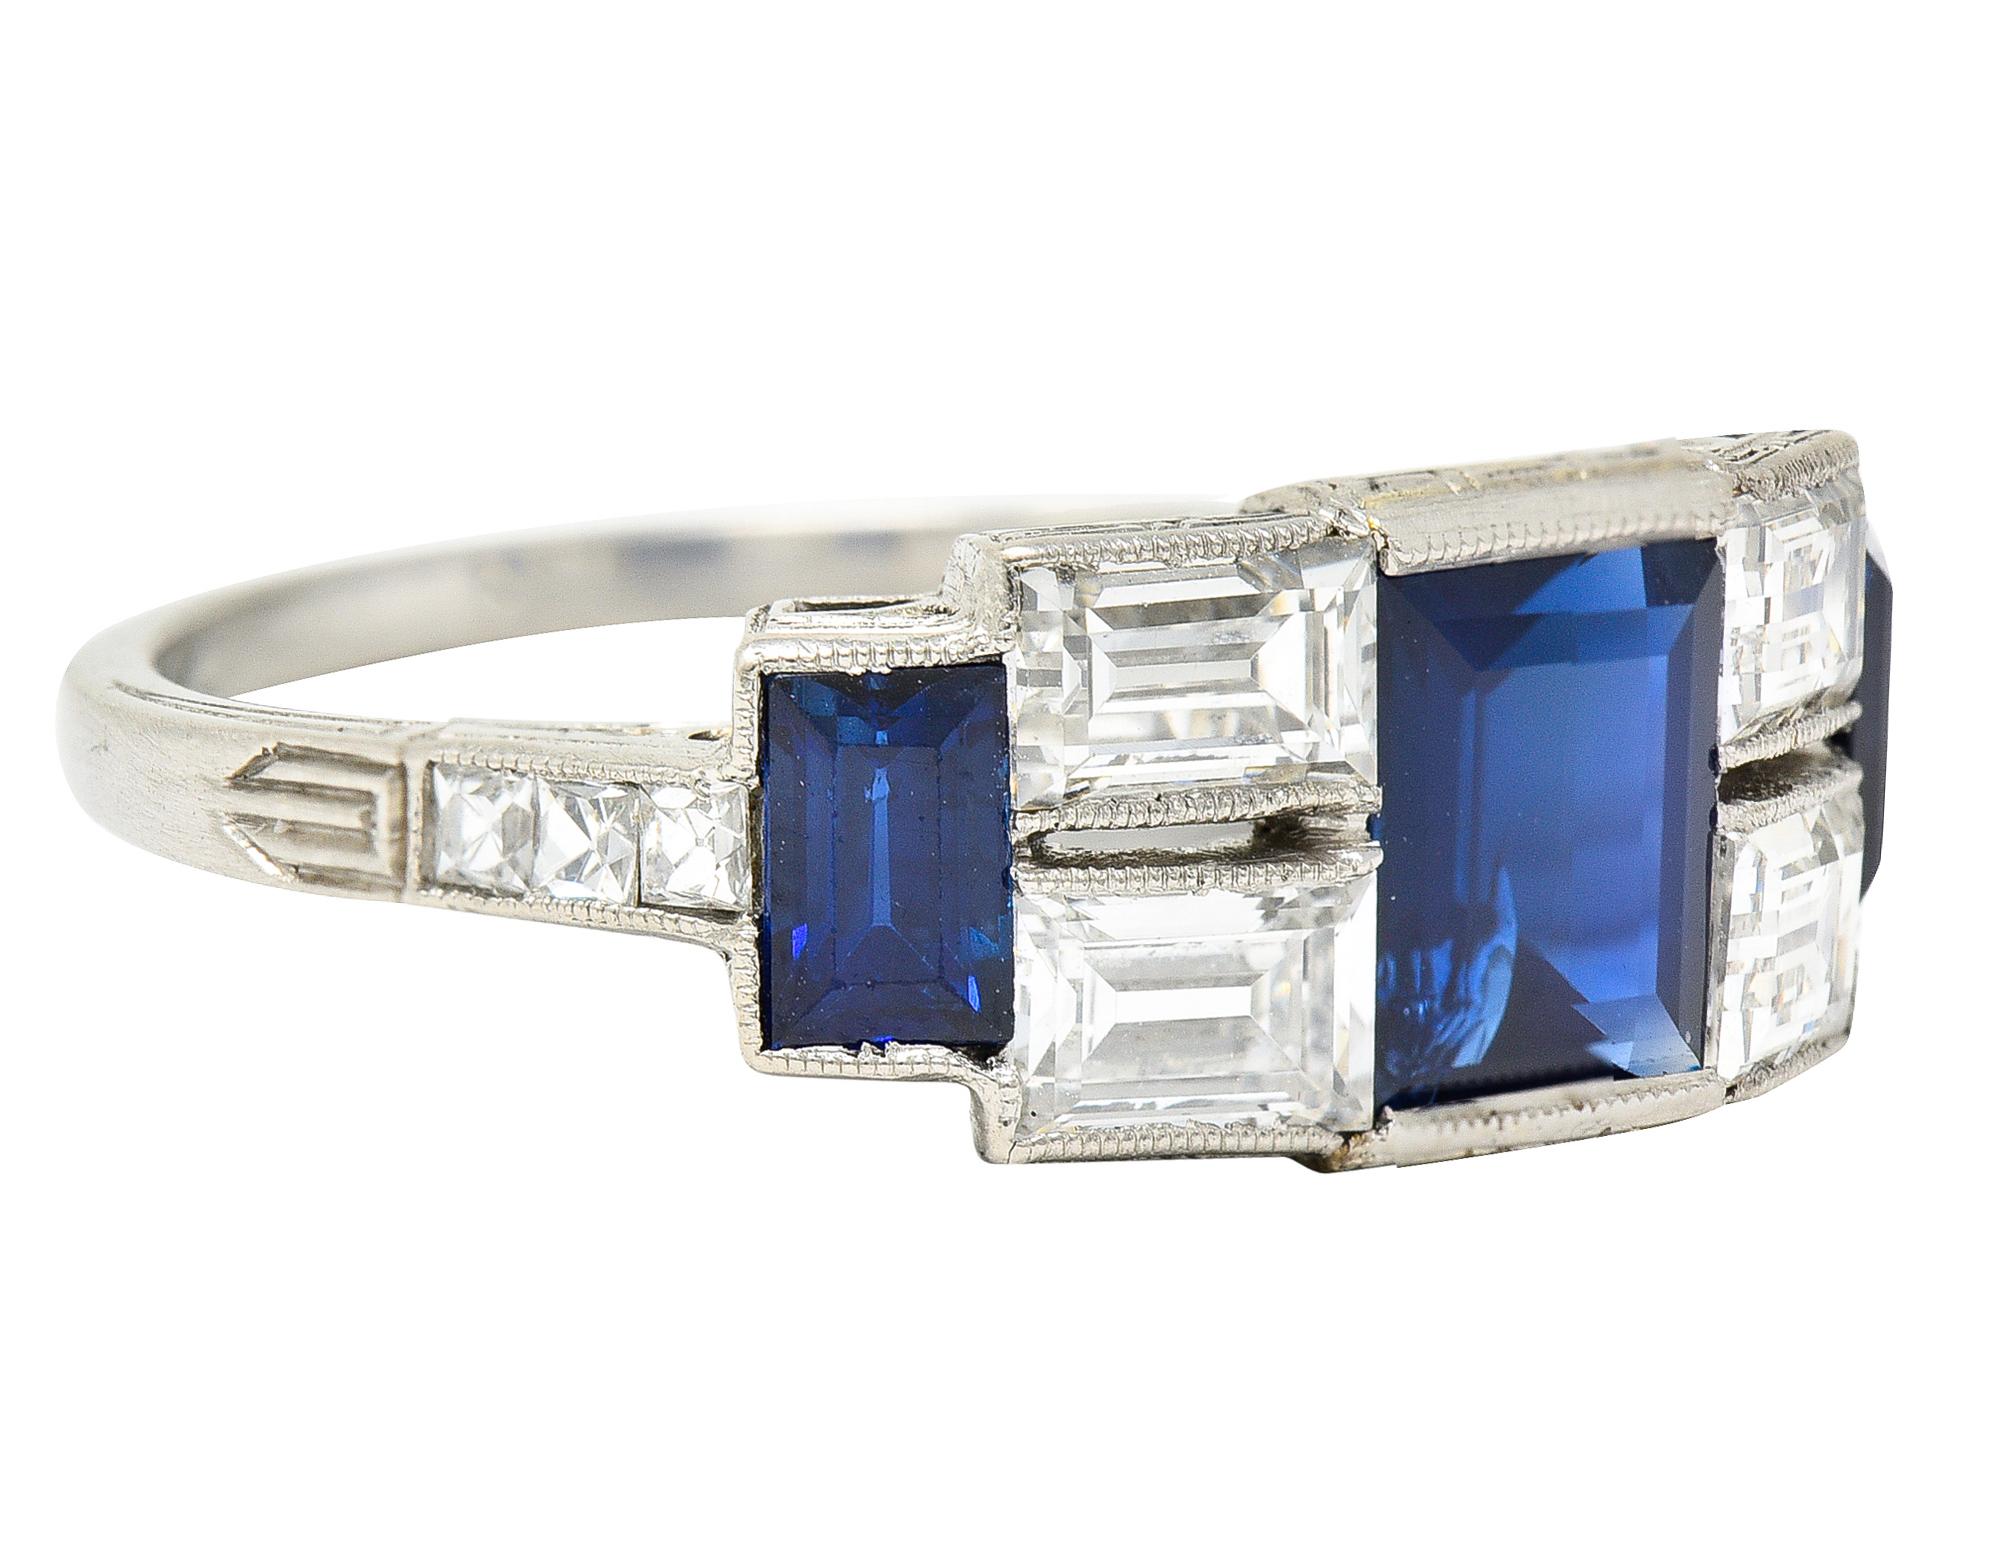 East to West band ring features sapphire and rectangular step cut diamonds. With channel set French cut diamonds at shoulders accented by linear engraving. Sapphires are transparent and well matched in royal blue color while weighing 1.25 carats